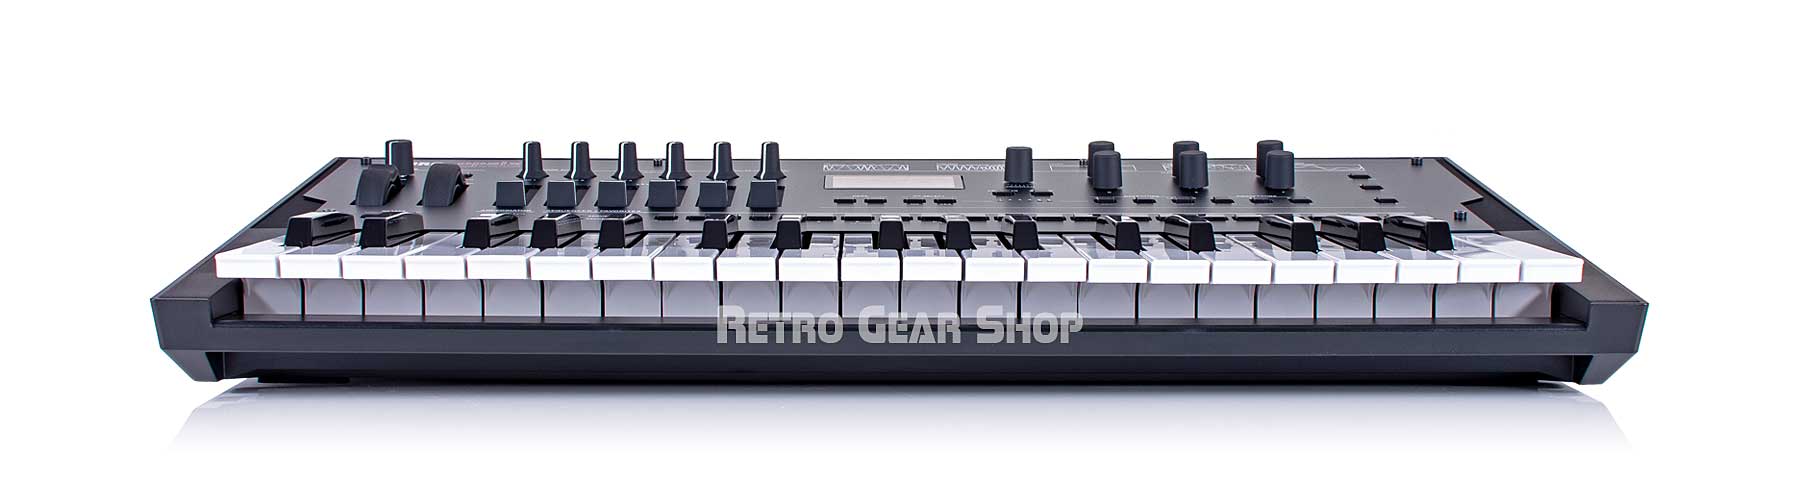 Korg Opsix Front